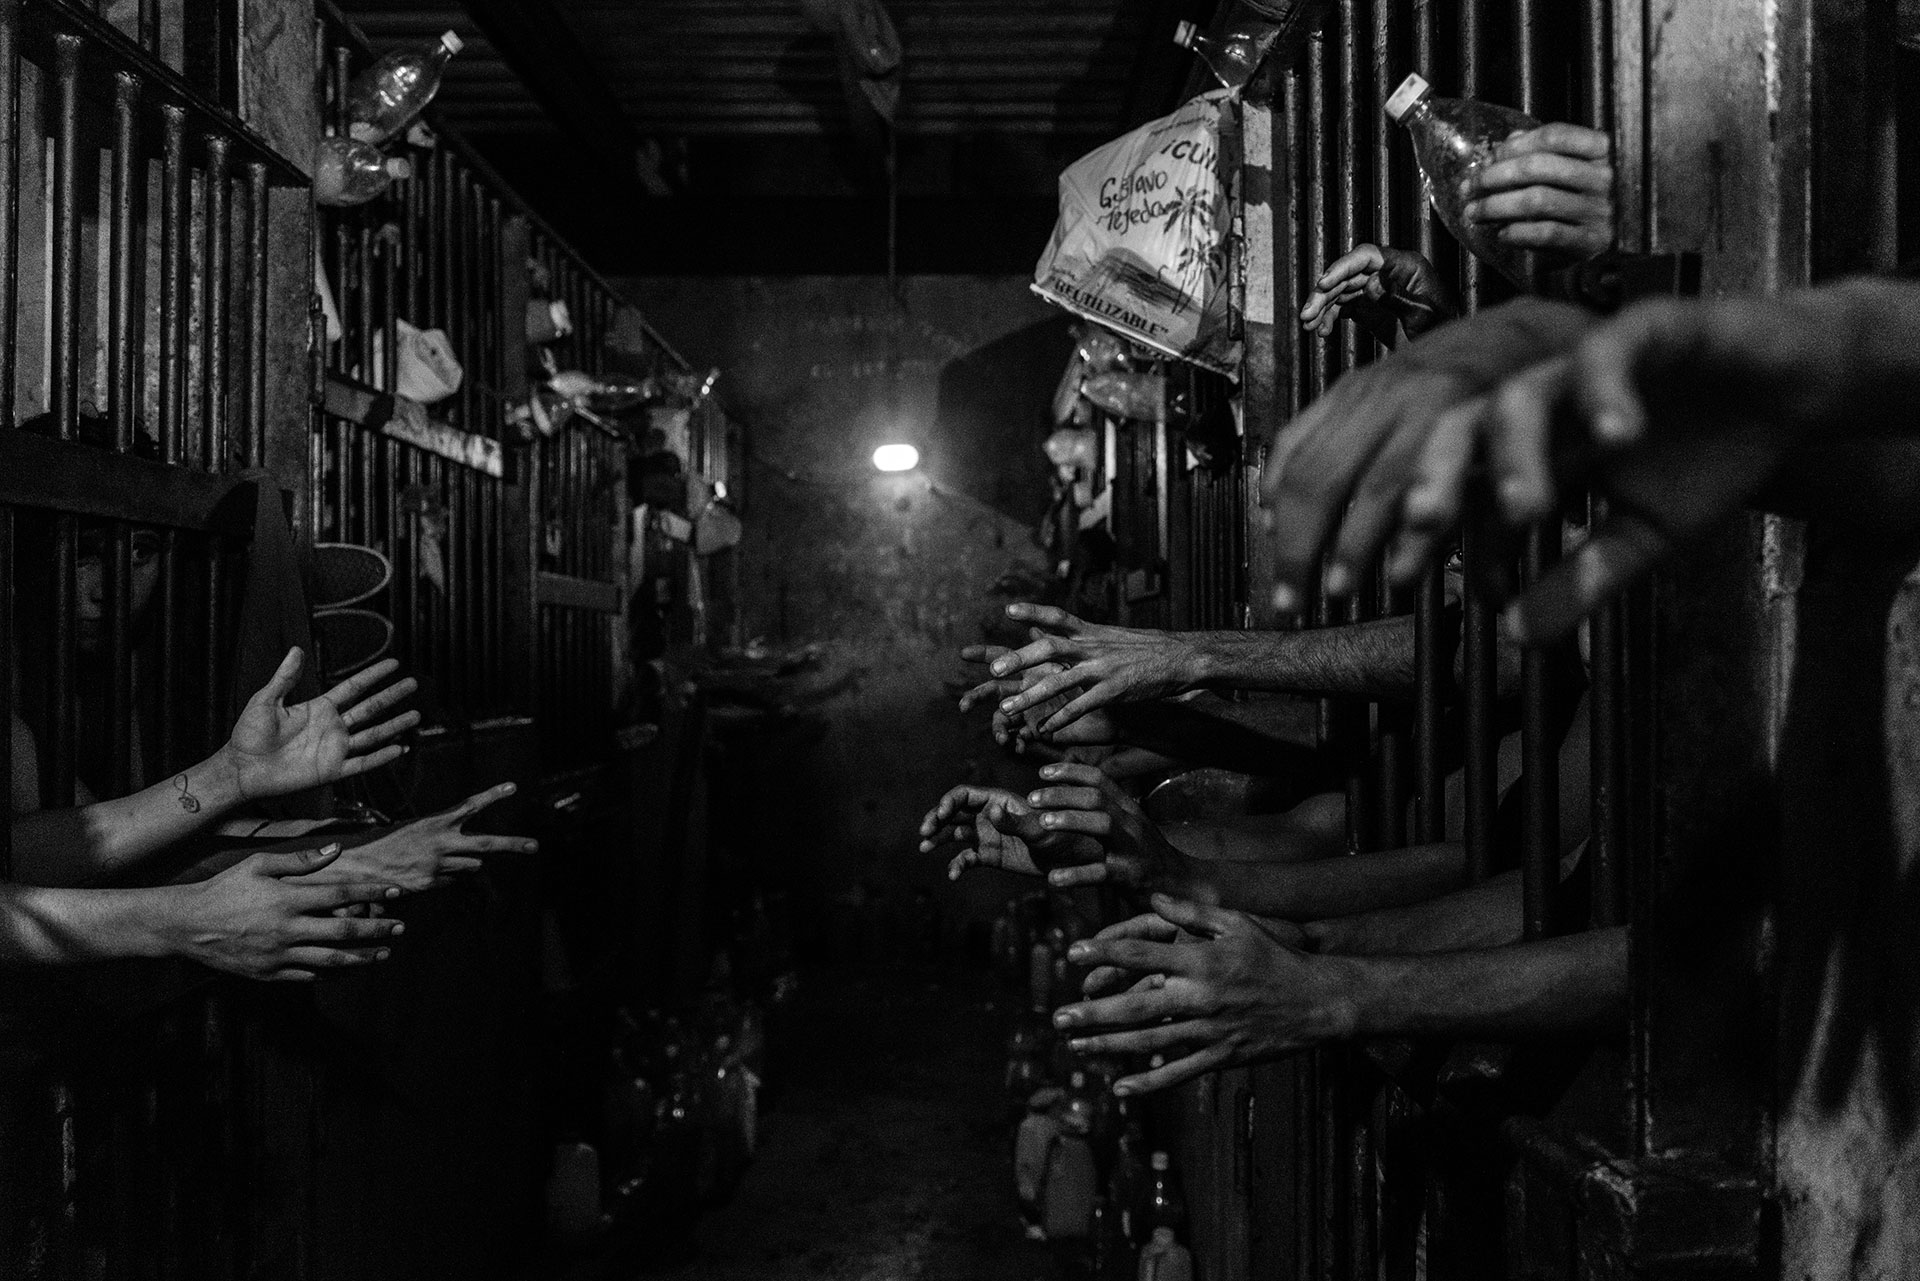 Prisoners beg for food and water in their cells in a police station in Caracas. Many of them claim to have a steady job but because of the economic crisis and the impossibility of putting food on the table, they end up taking to the streets and committing crimes.